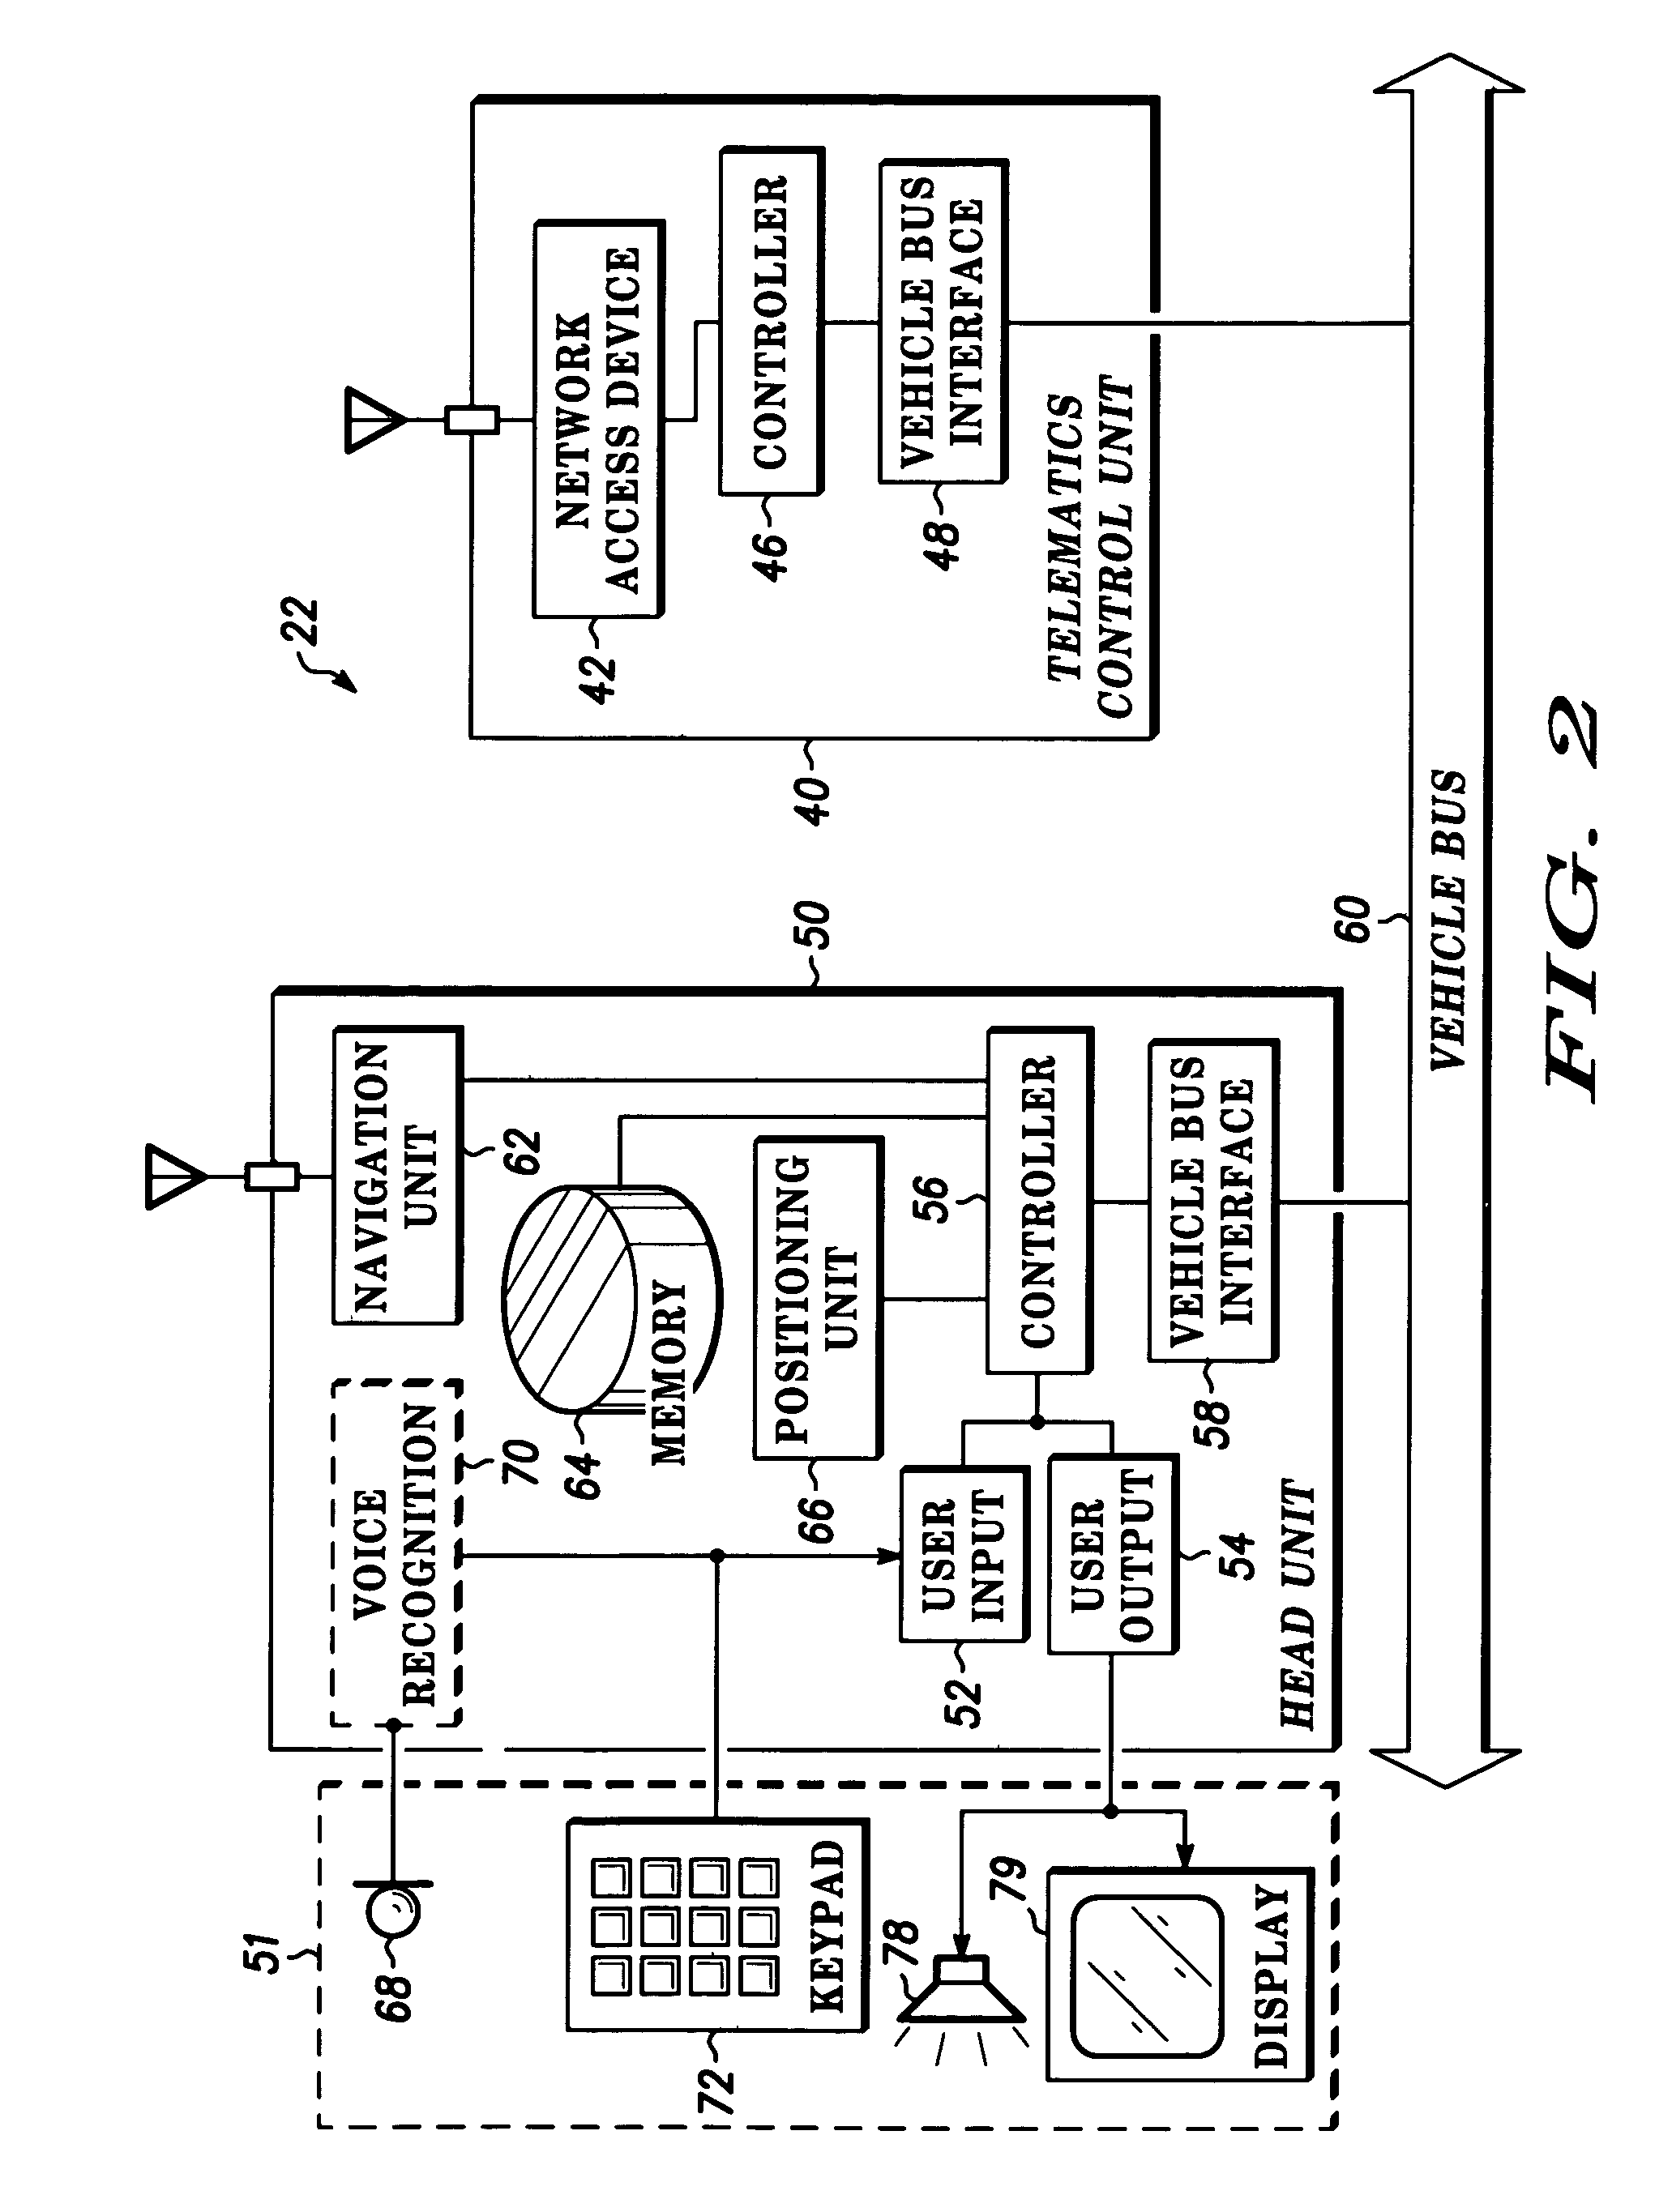 Conversion of calls from an ad hoc communication network